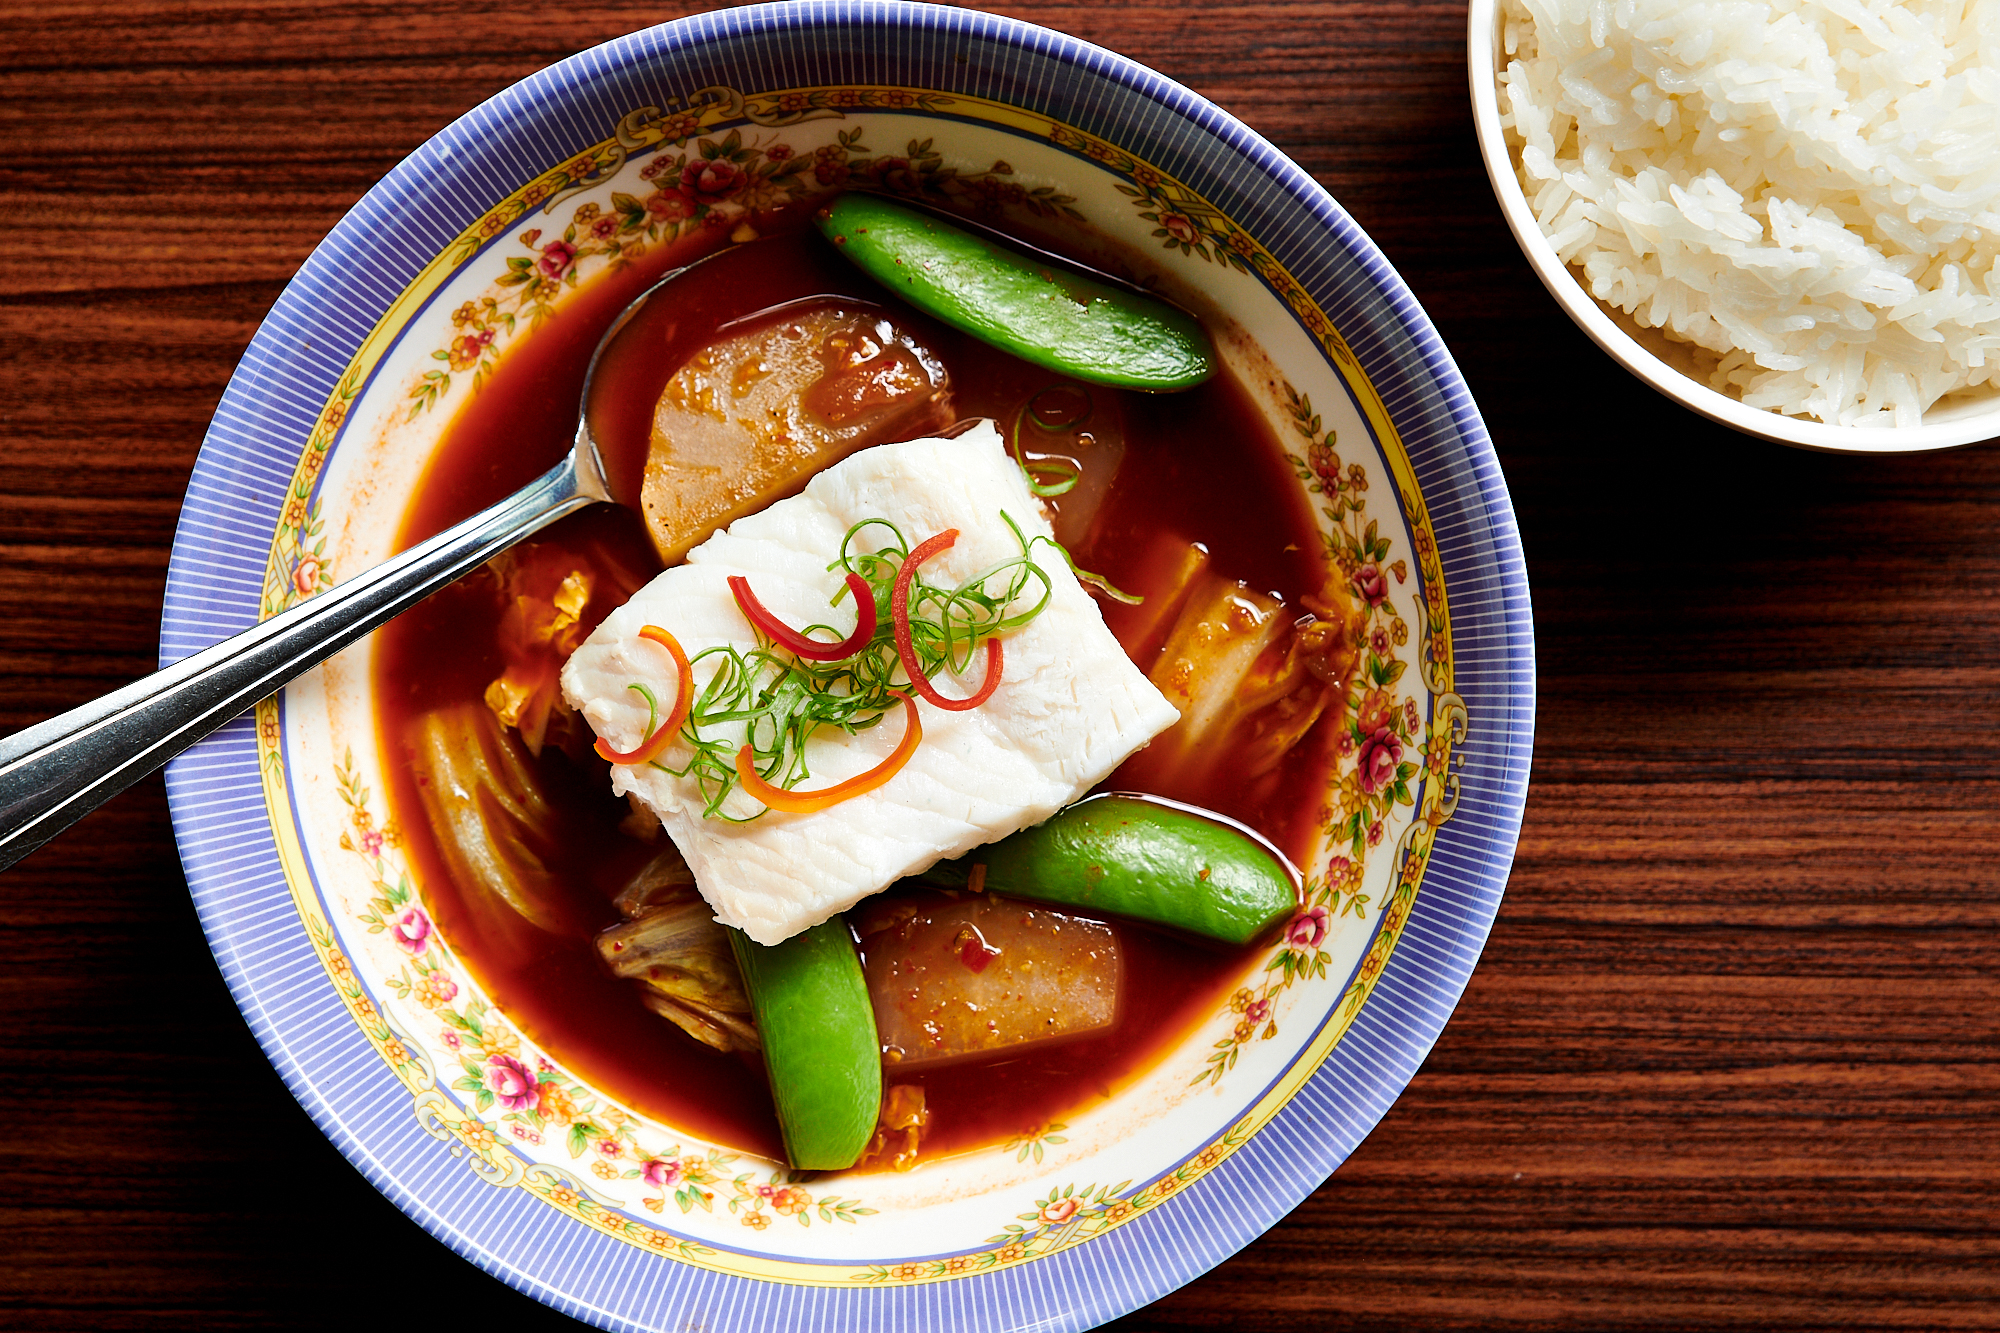 A picture of a red bowl of coconut-milk-free curry with a single chunk of halibut, pieces of cabbage, and snap peas. The curry is served in an ornate bowl with a side of rice.